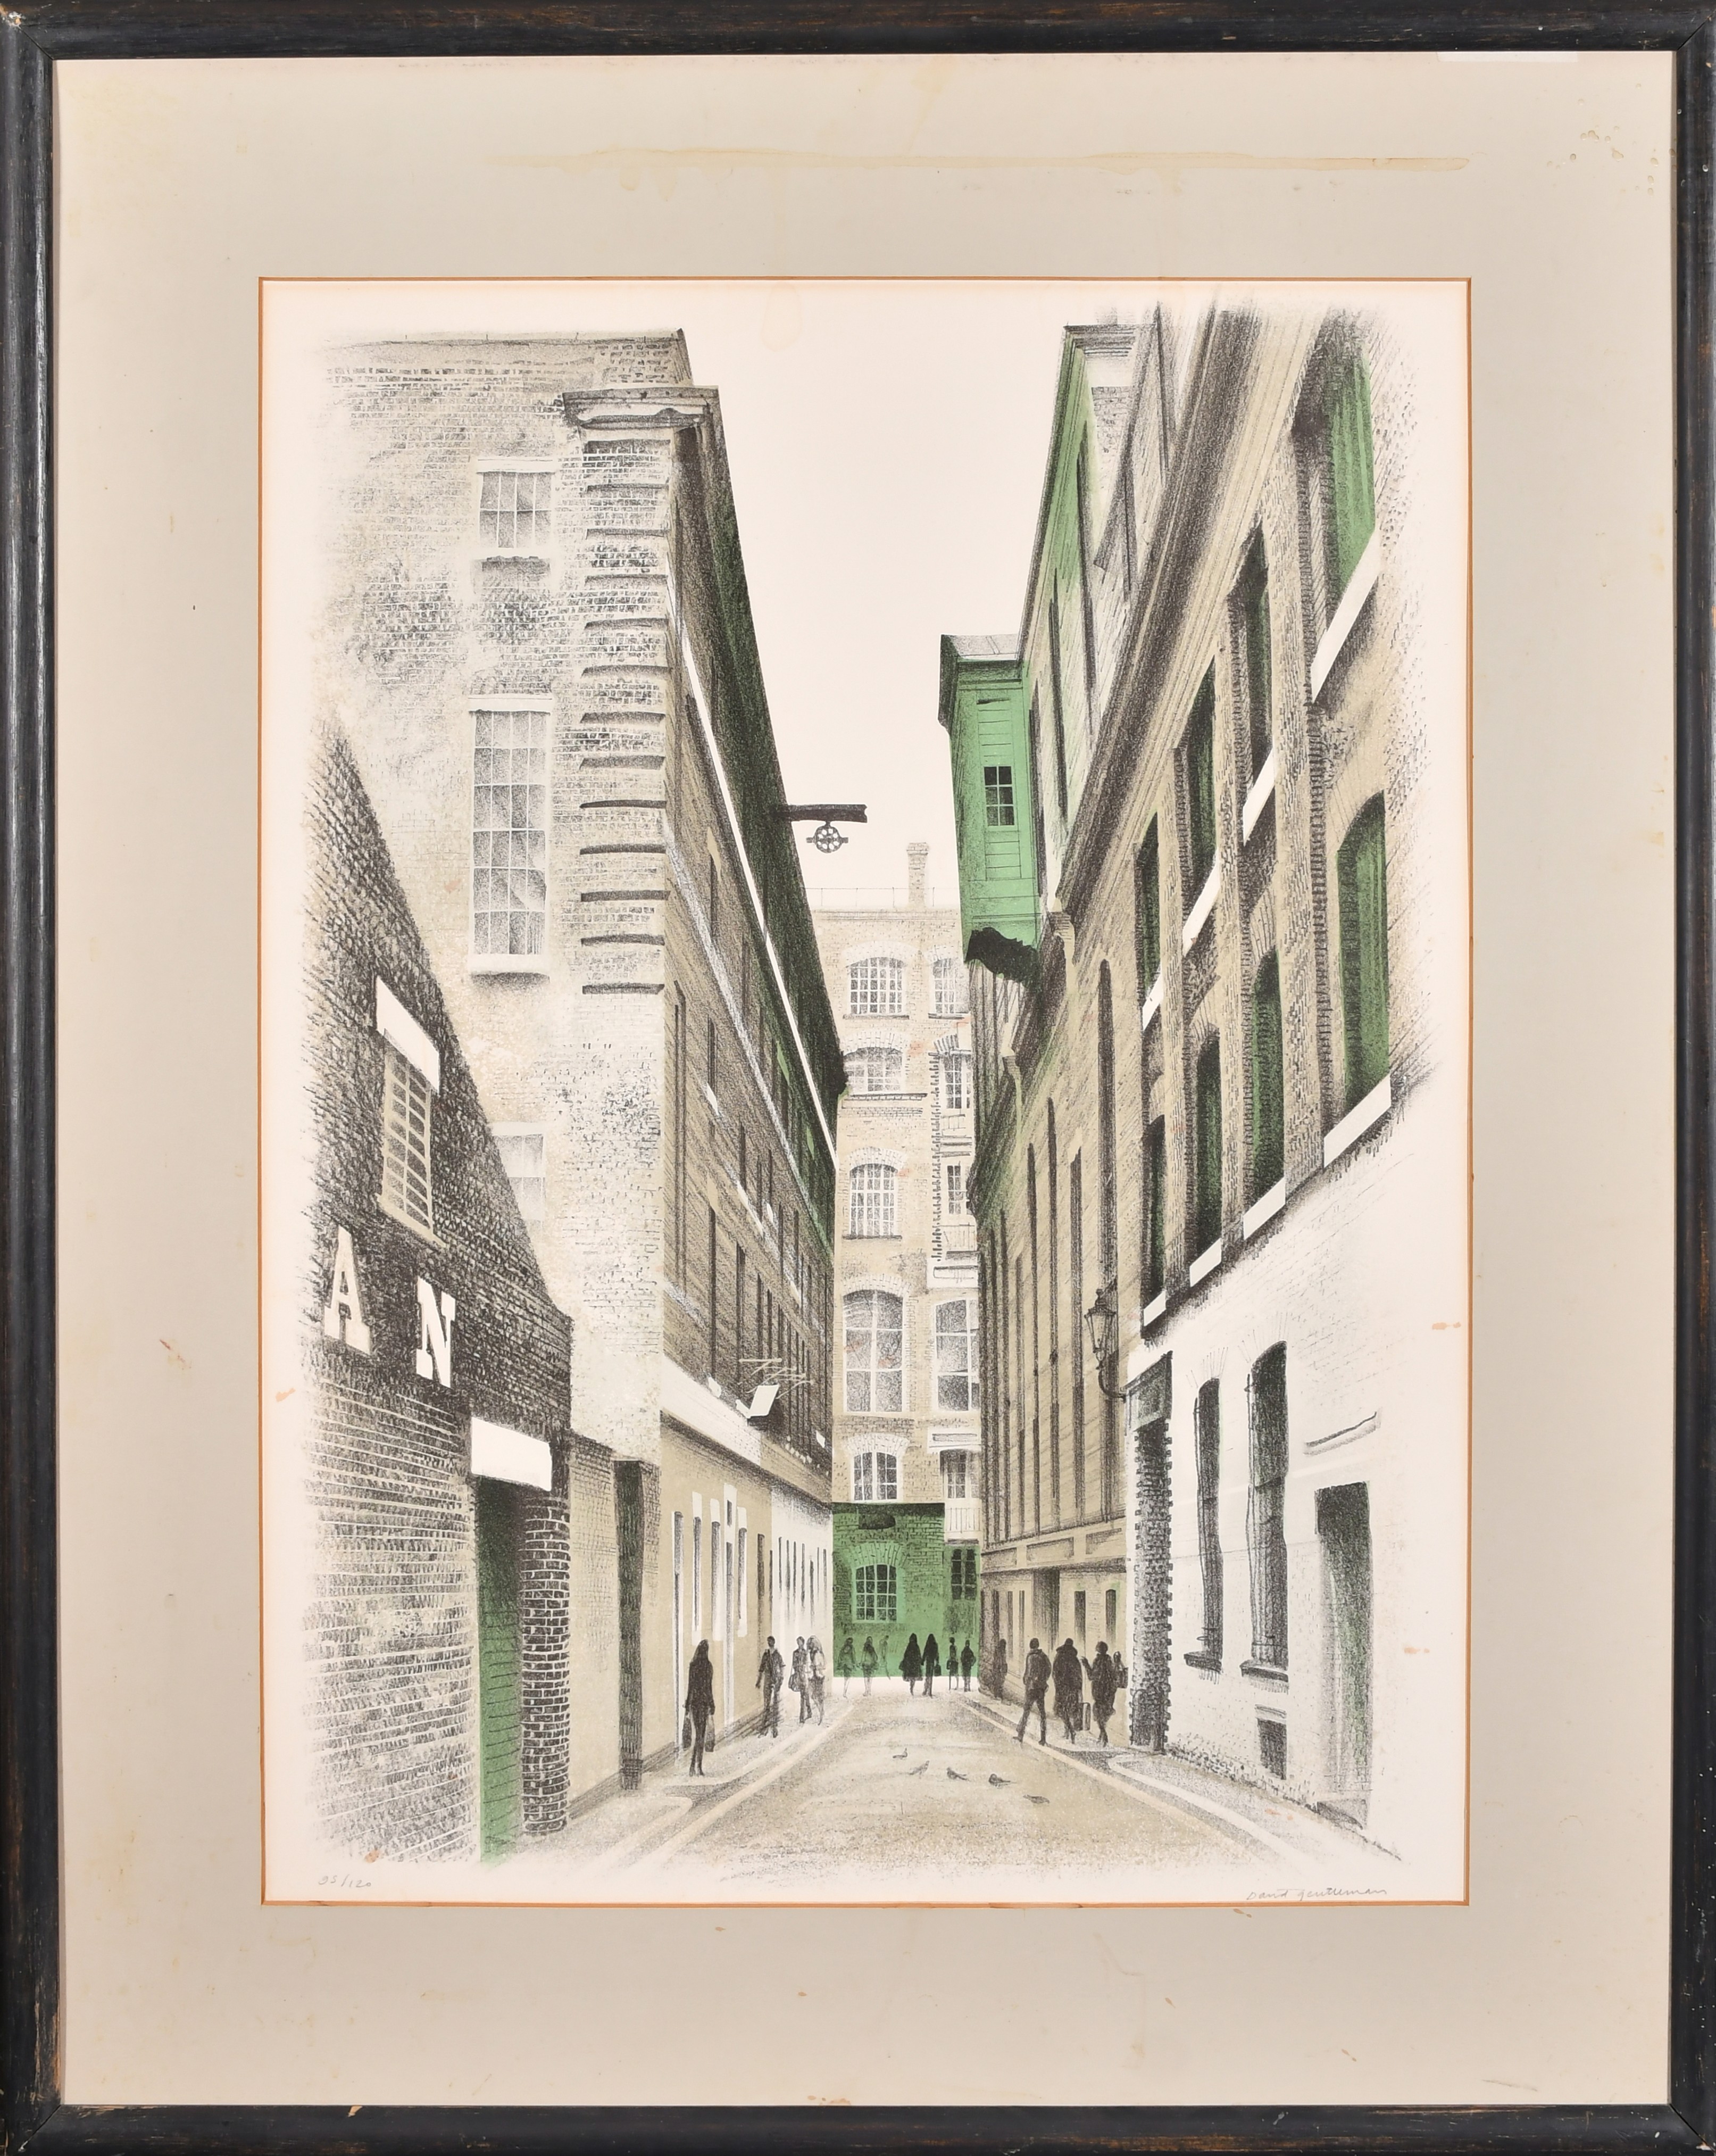 David Gentleman (1930-) British. "Langley Street", Lithograph, Signed and numbered 93/120 in pencil, - Image 2 of 5